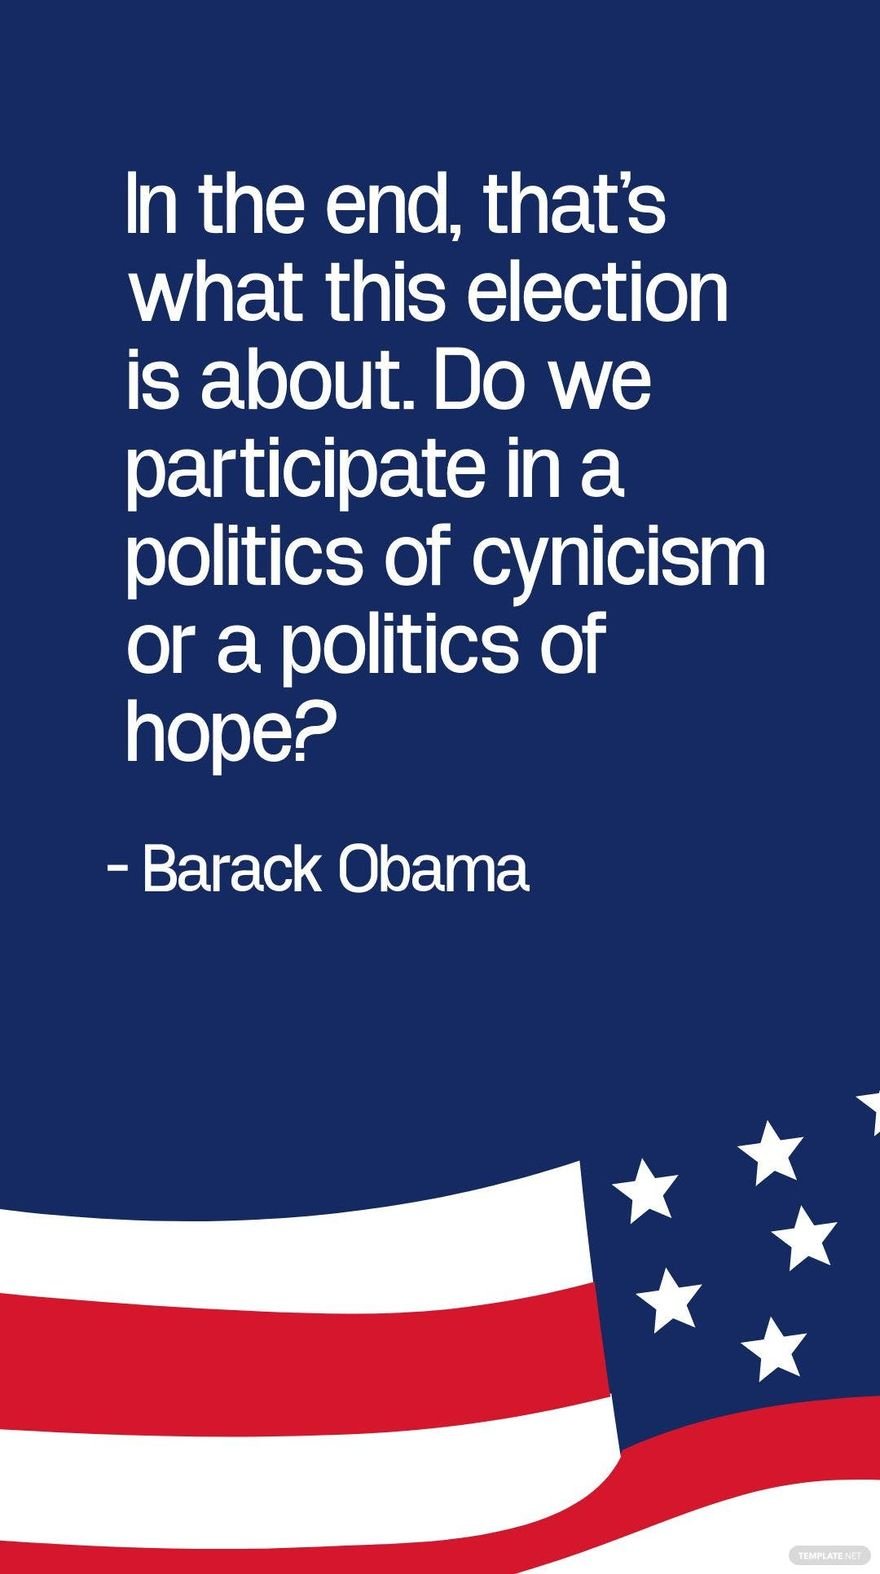 Barack Obama - In the end, that's what this election is about. Do we participate in a politics of cynicism or a politics of hope?